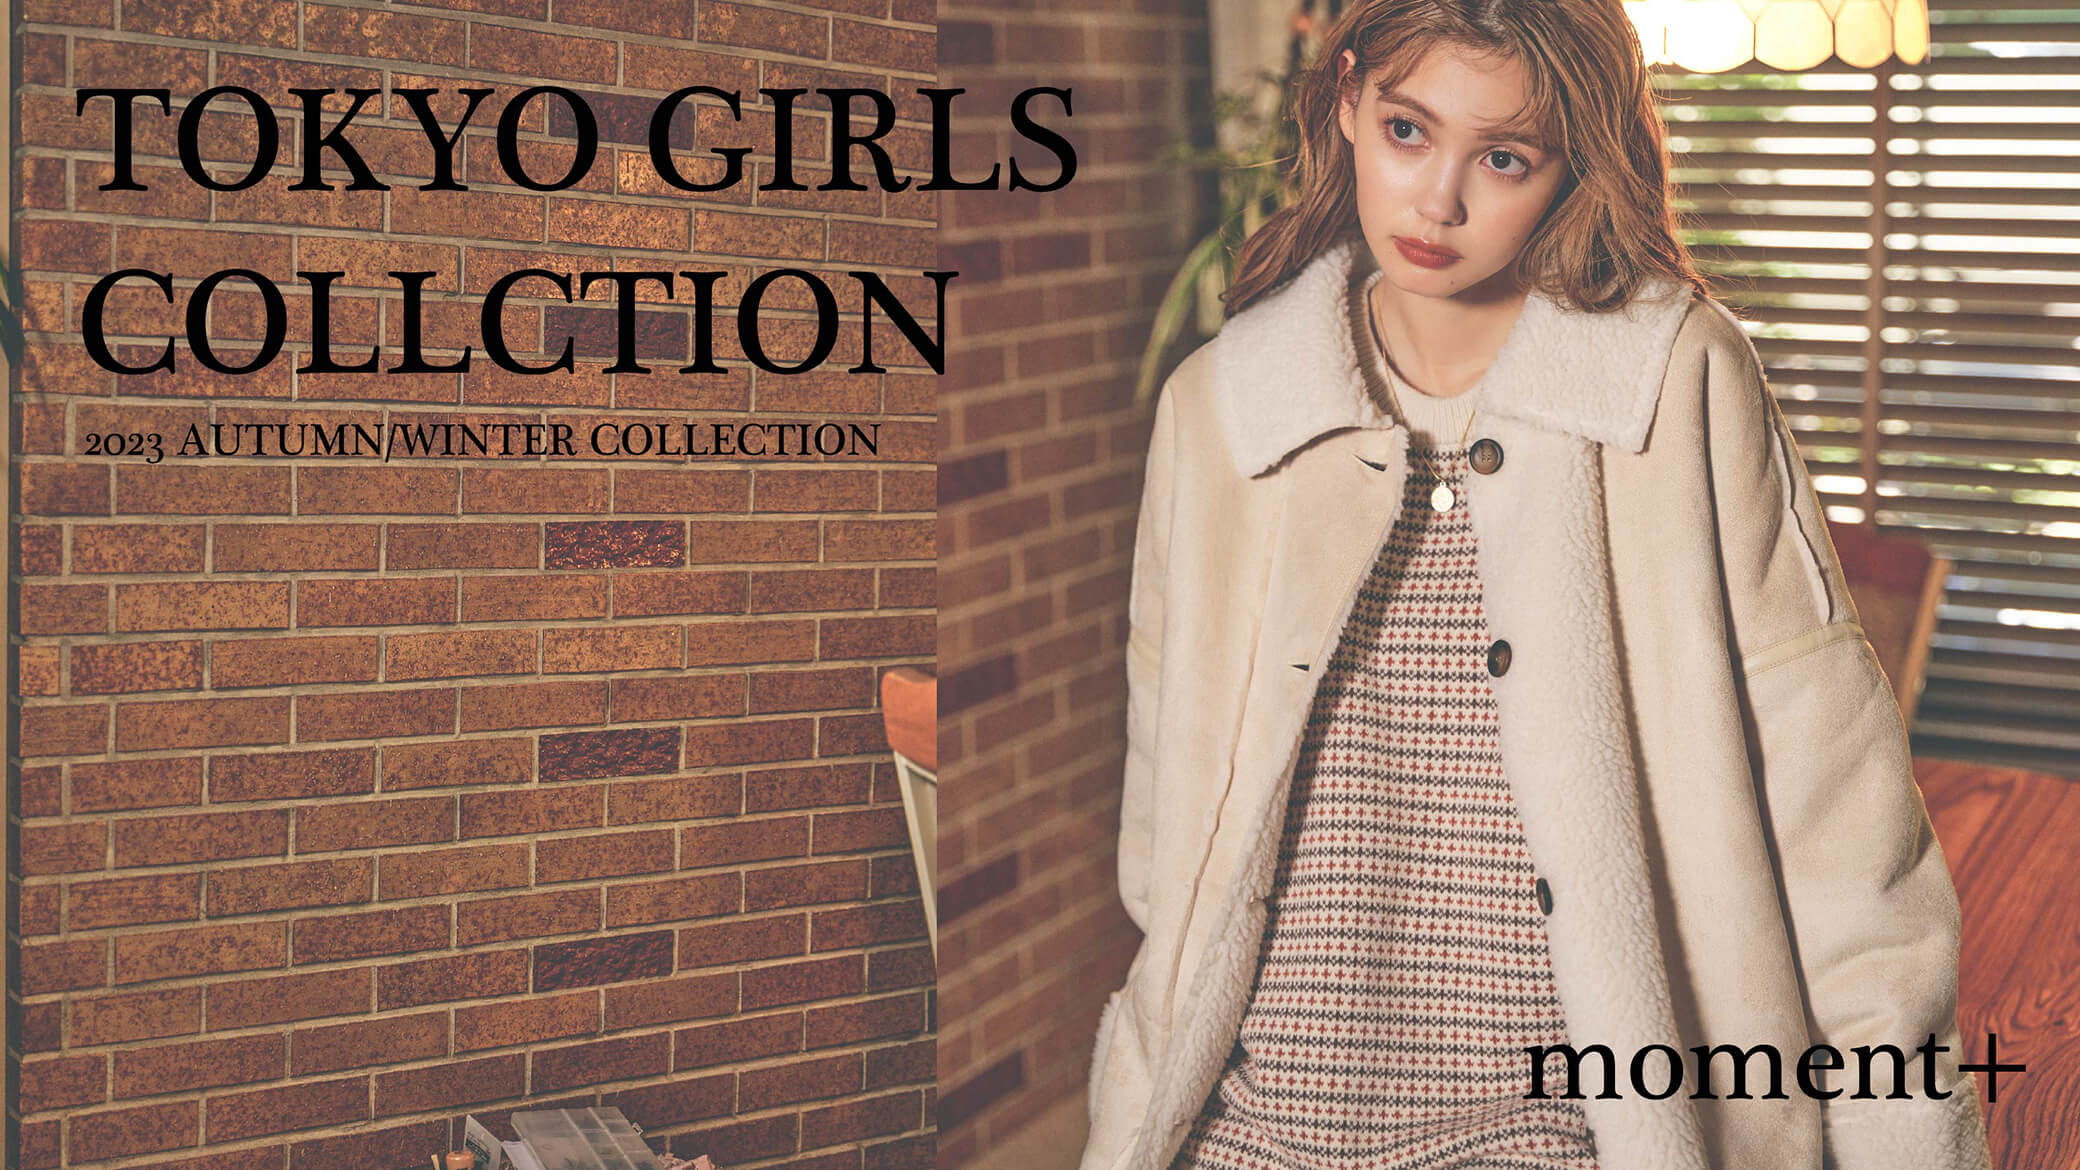 Tokyo Girls Collection 2023 AUTUMN/WINTER COLLECTION